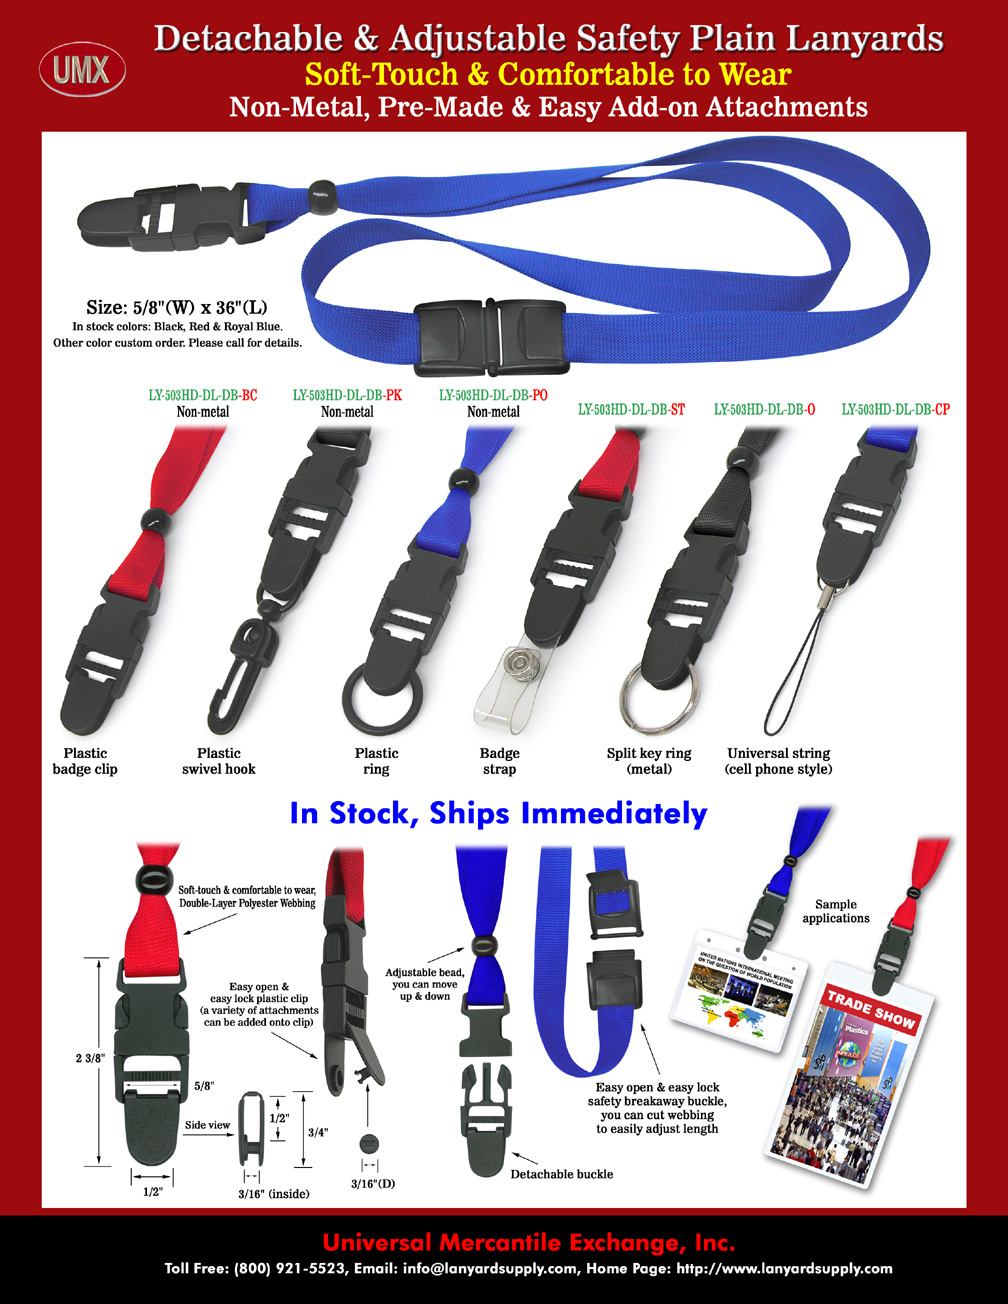 Detachable and Adjustable Safety Breakaway Plain Lanyards - Soft-Touch and Multi-Functional